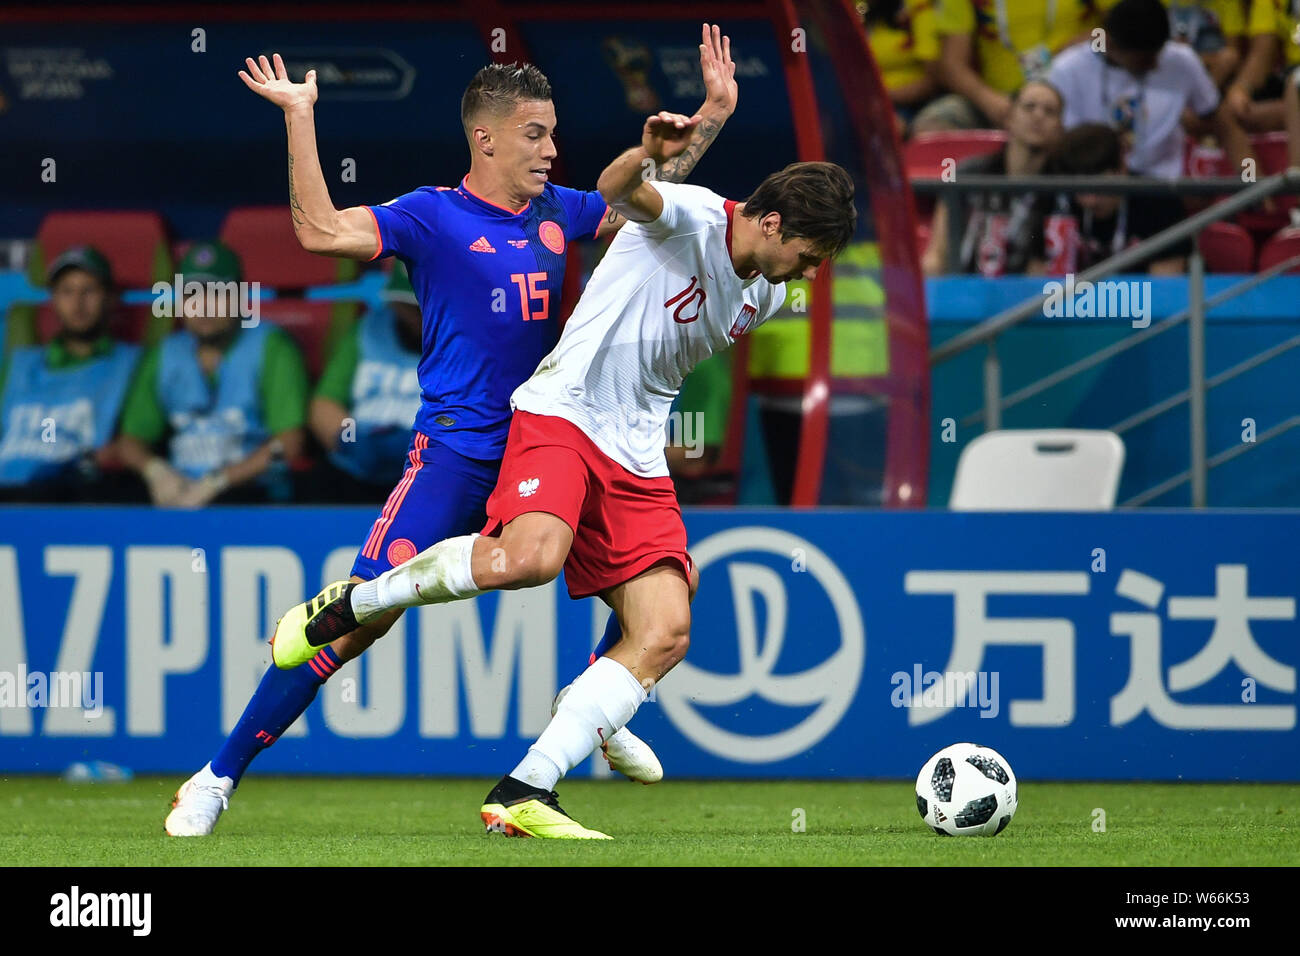 Mateus Uribe of Colombia, left, challenges Grzegorz Krychowiak of Poland with an advertising board for Chinese conglomerate Dalian Wanda Group in the Stock Photo